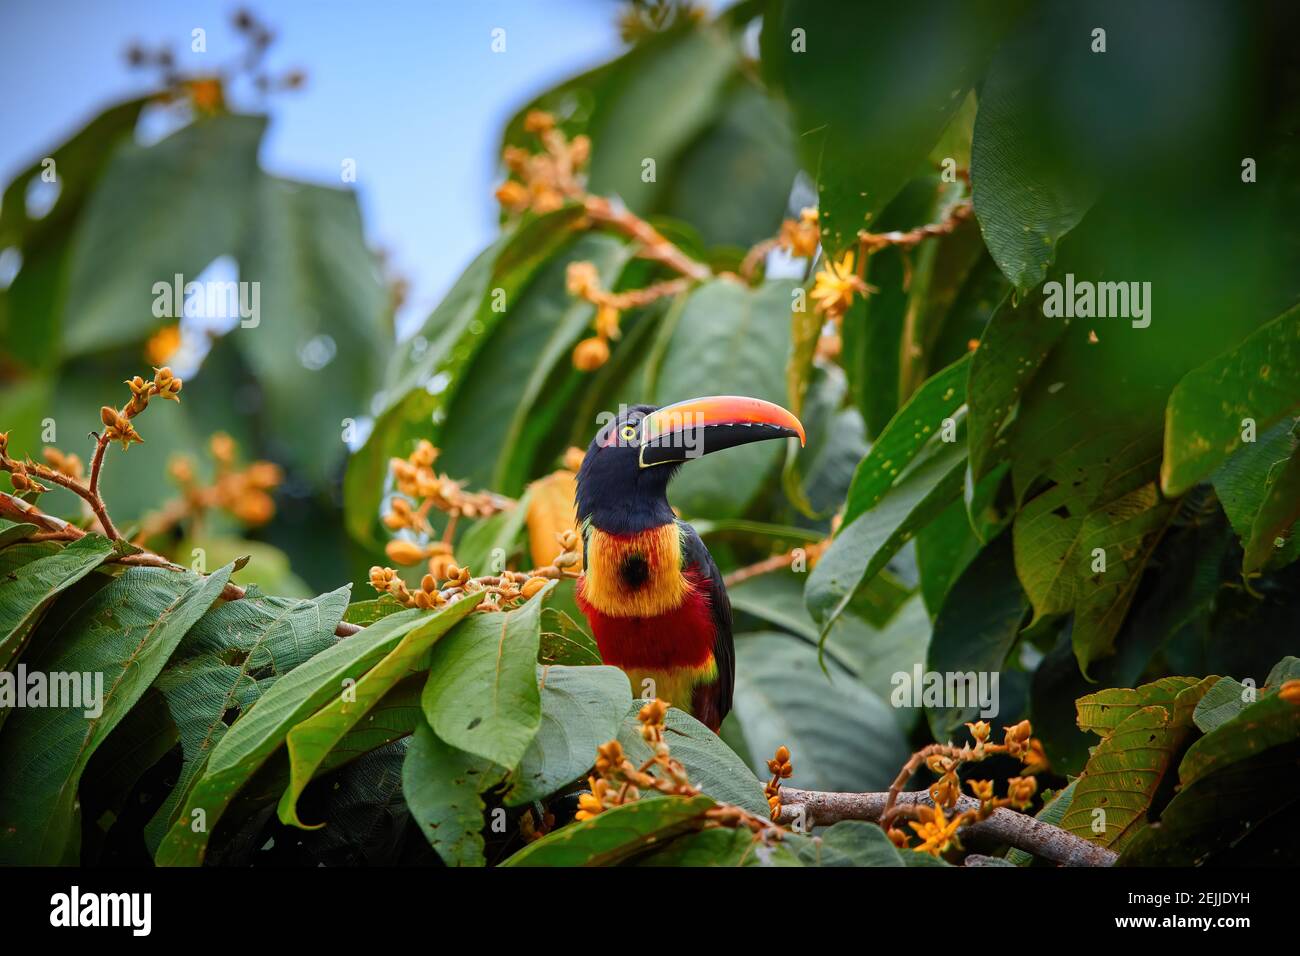 Fiery-billed aracari, Pteroglossus frantzii, toucan among green leaves and orange fruits. Large red-black bill, black, yellow and red plumage. Typical Stock Photo